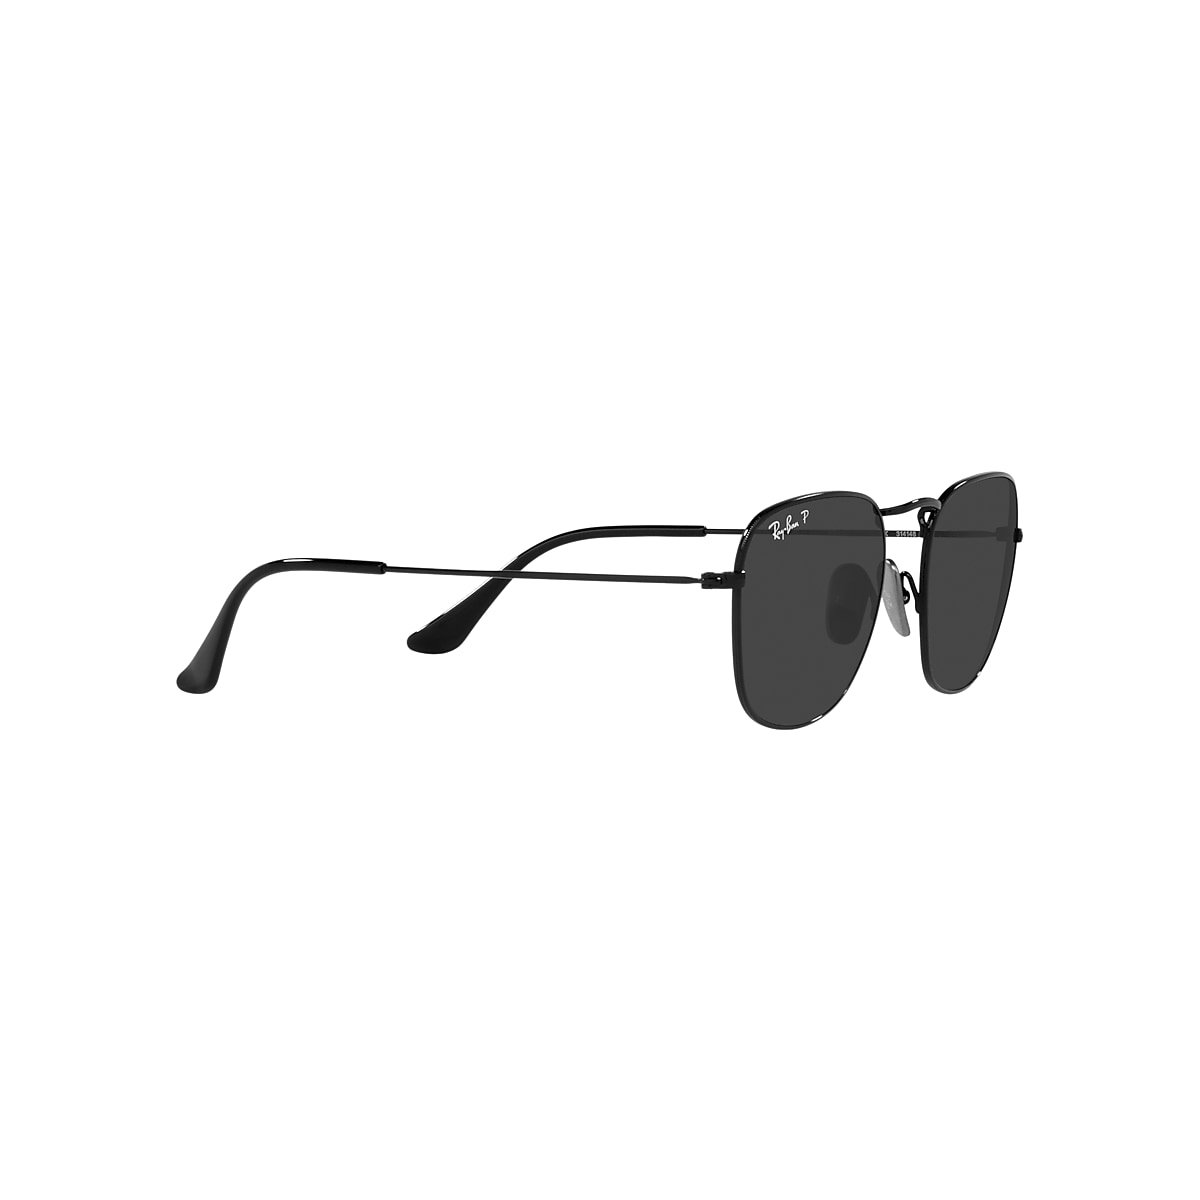 FRANK TITANIUM LIMITED EDITION - | in US Black Sunglasses RB8157 Black and Ray-Ban®